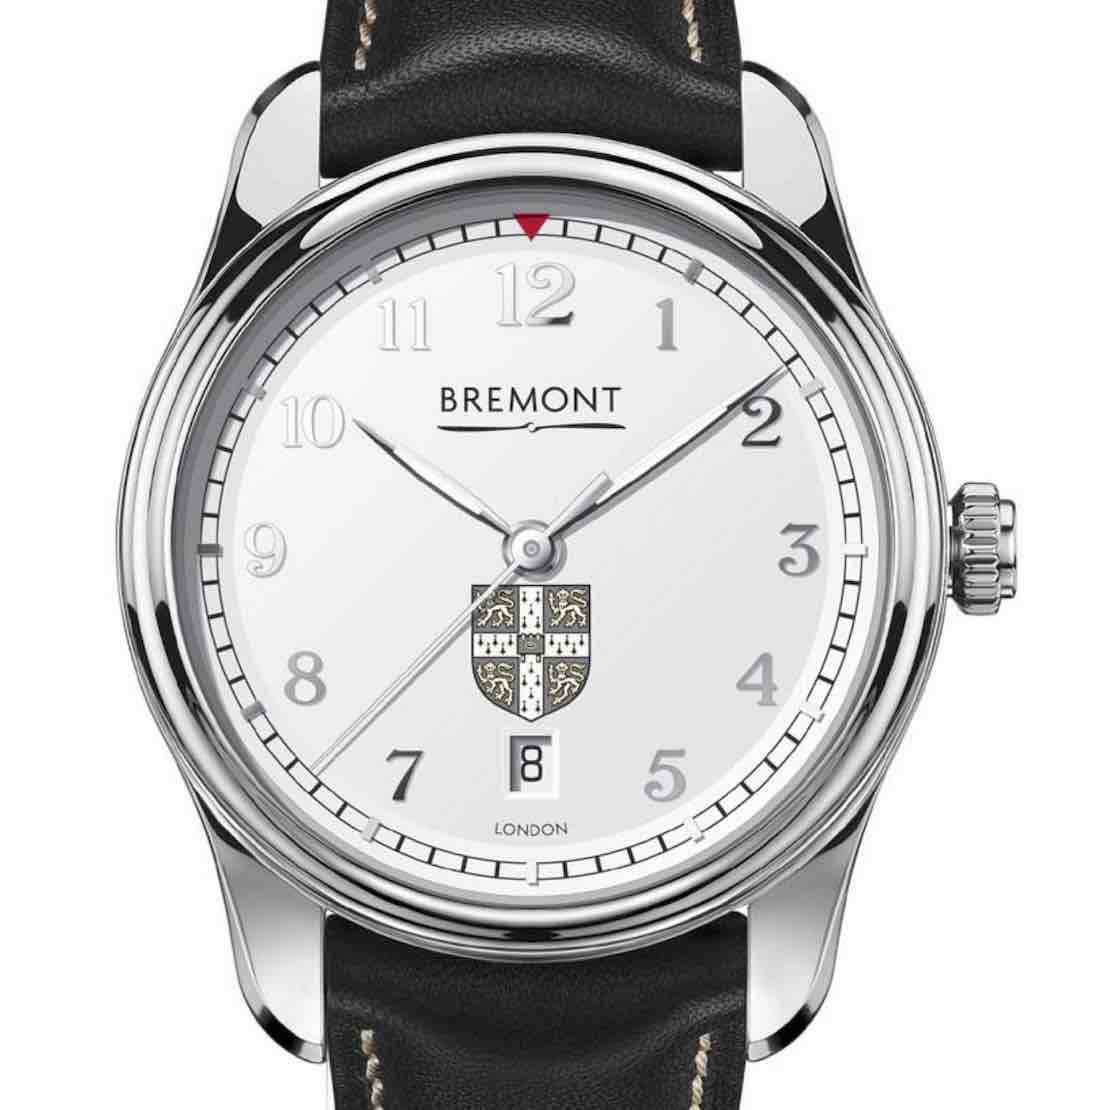 Cambridge-Bremont-Airco-Mach-2-Watch-White-Dial-Leather-Strap